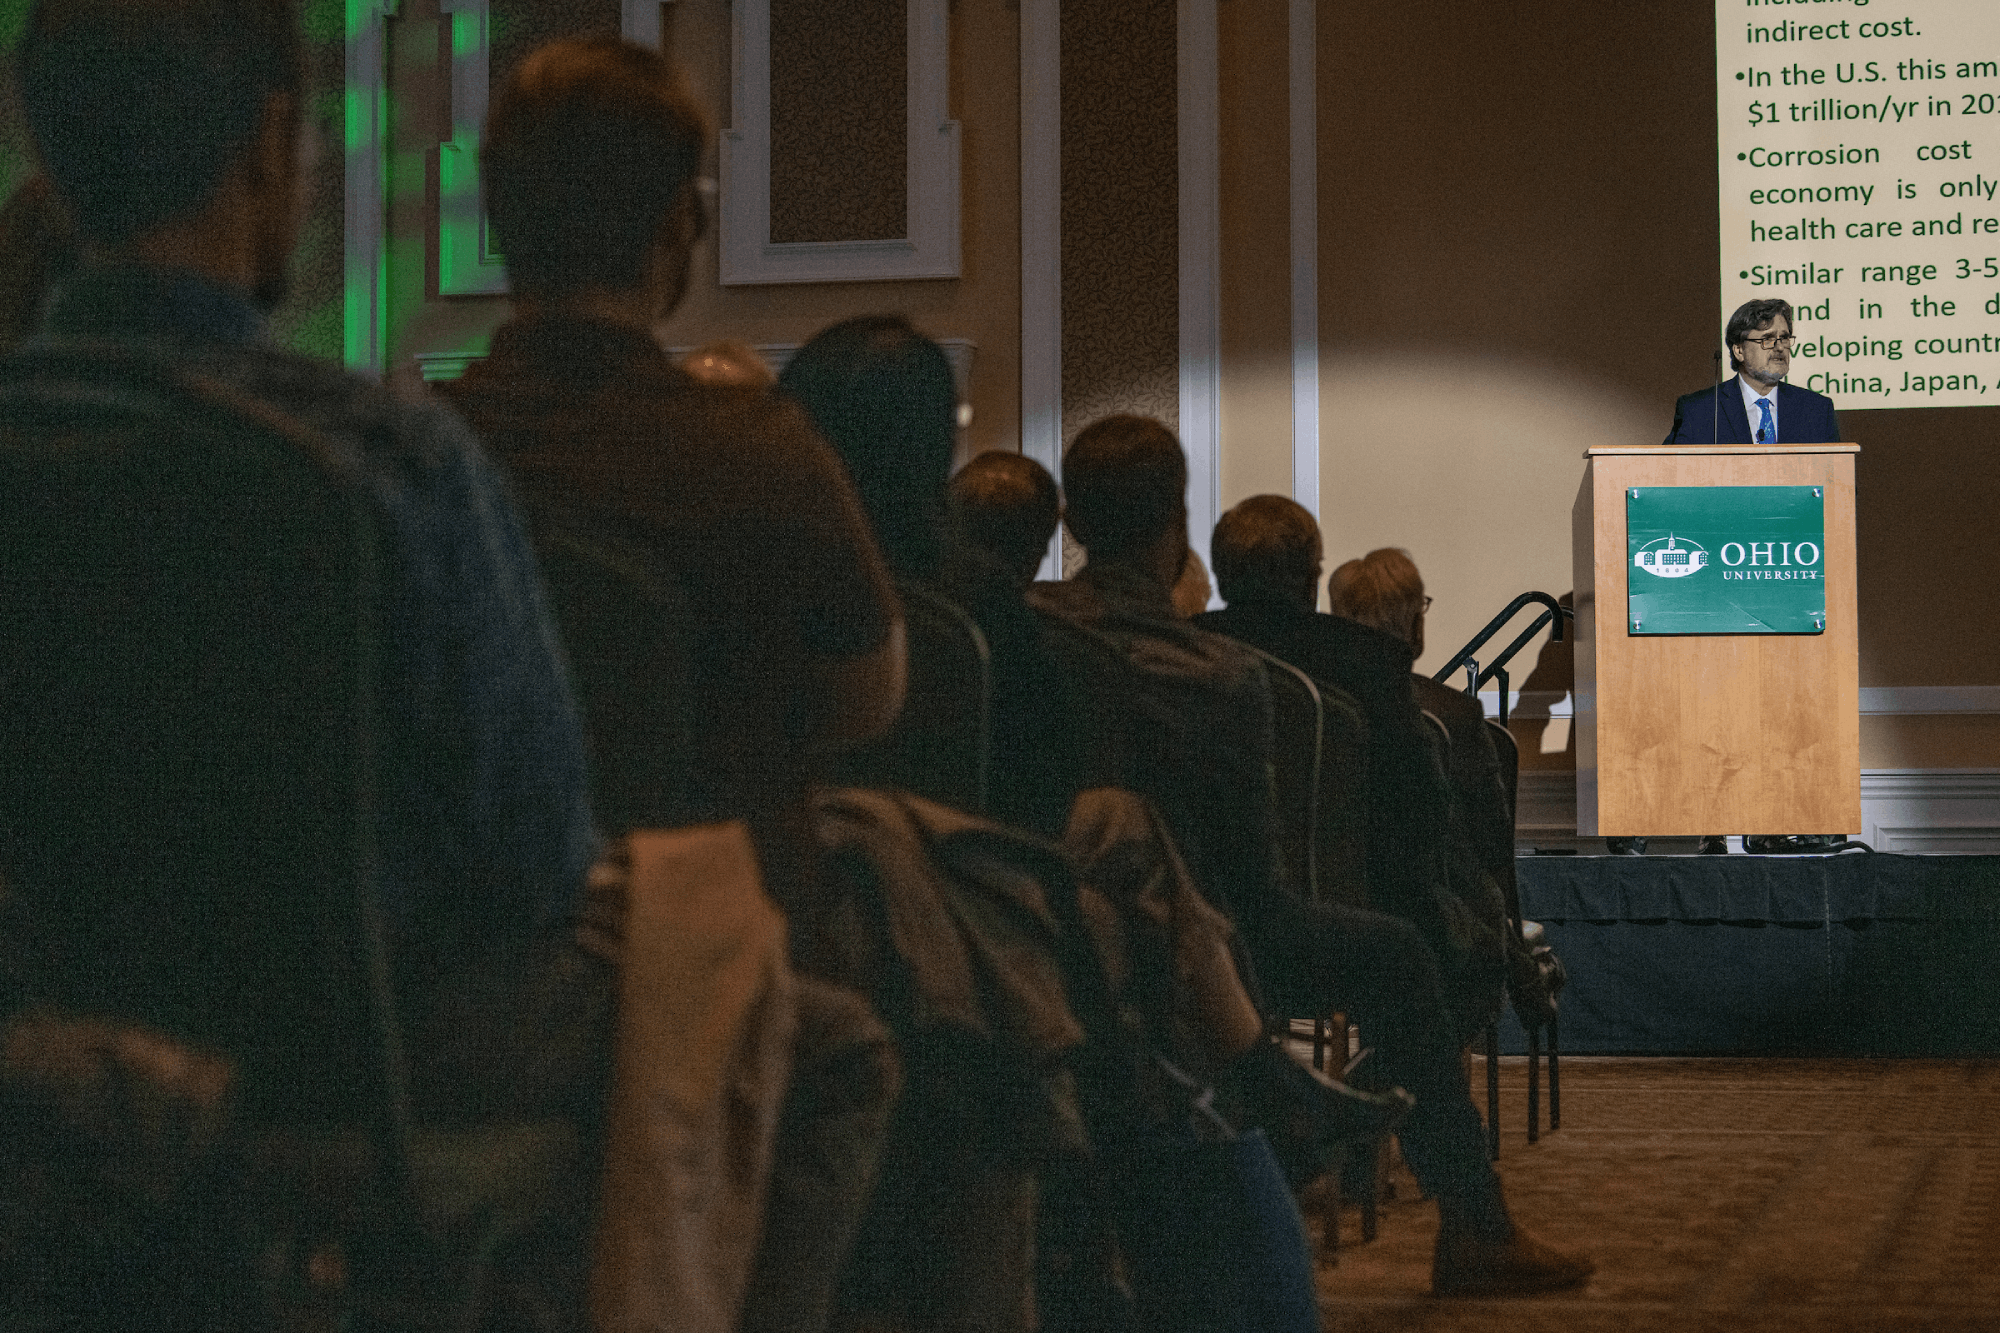 Srdjan Nesic, professor in the Russ College of Engineering and Technology and director of the Institute for Corrosion and Multiphase Flow Technology, gives his lecture during his Distinguished Professor Lecture and Portrait Unveiling in the Baker Ballroom in Athens, Ohio.